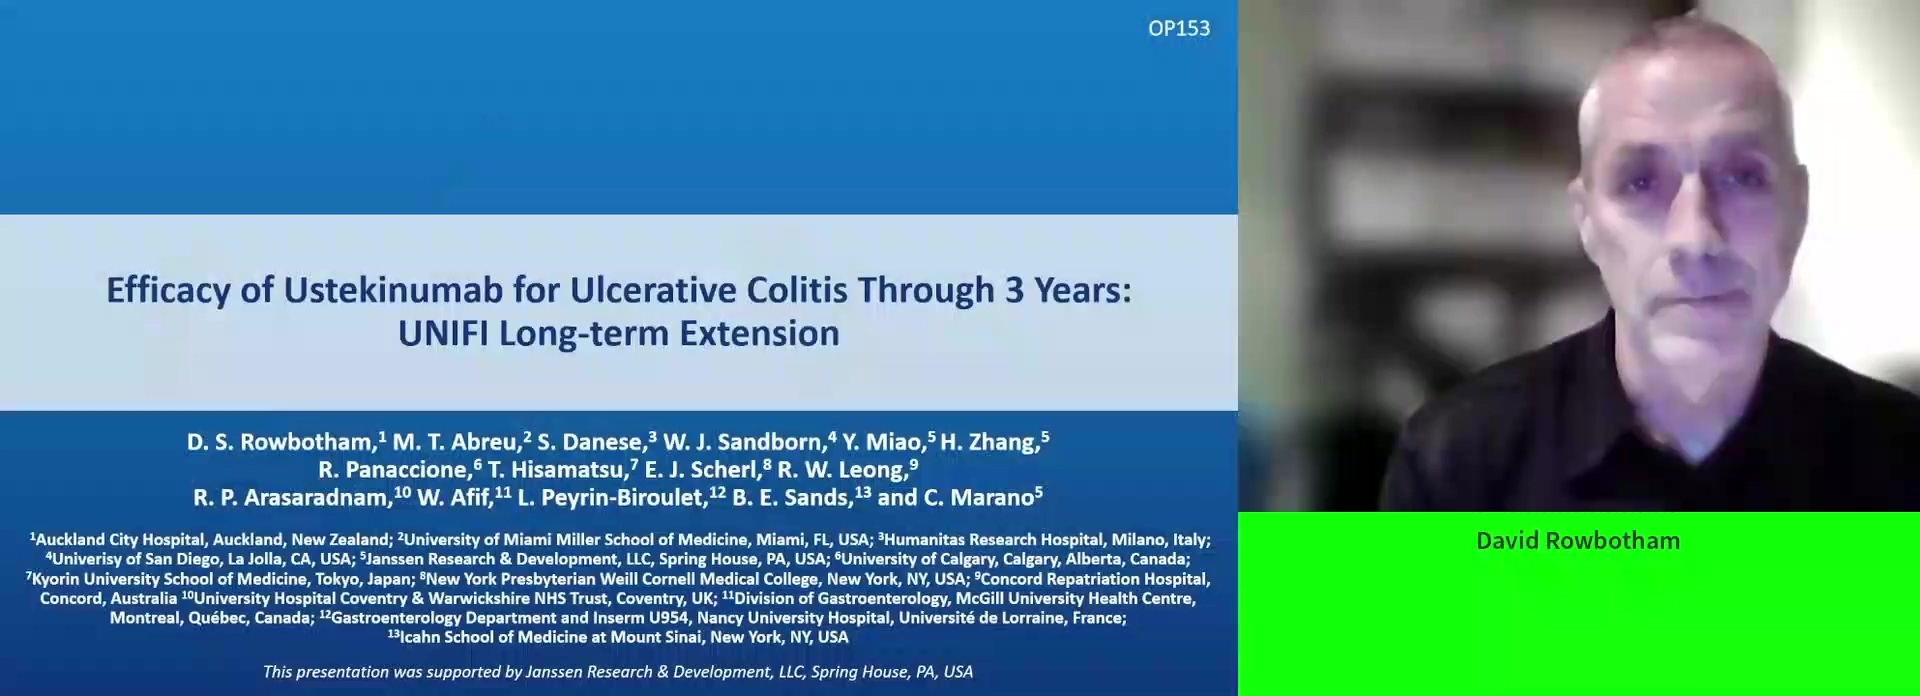 EFFICACY OF USTEKINUMAB FOR ULCERATIVE COLITIS IN PATIENTS THROUGH 3 YEARS: UNIFI LONG-TERM EXTENSION